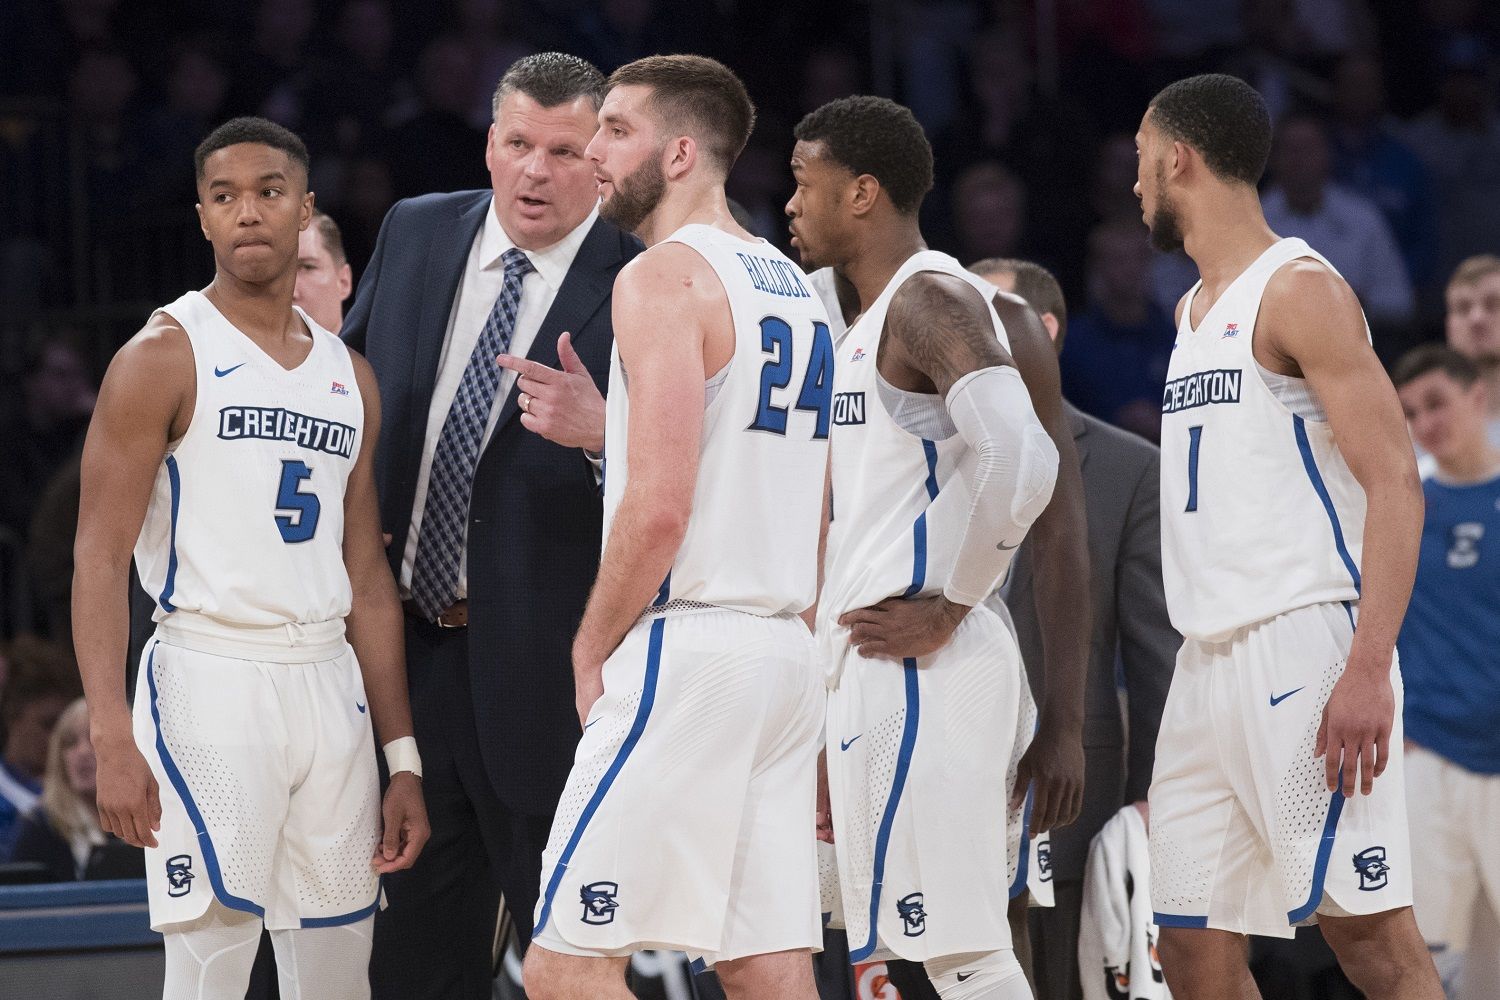 Creighton head coach Greg McDermott, second from left, talks to his team during a time out in the second half of an NCAA college basketball game against Providence in the quarterfinals of the Big East conference tournament, Thursday, March 8, 2018, at Madison Square Garden in New York. Providence won 72-68 in overtime. (AP Photo/Mary Altaffer)